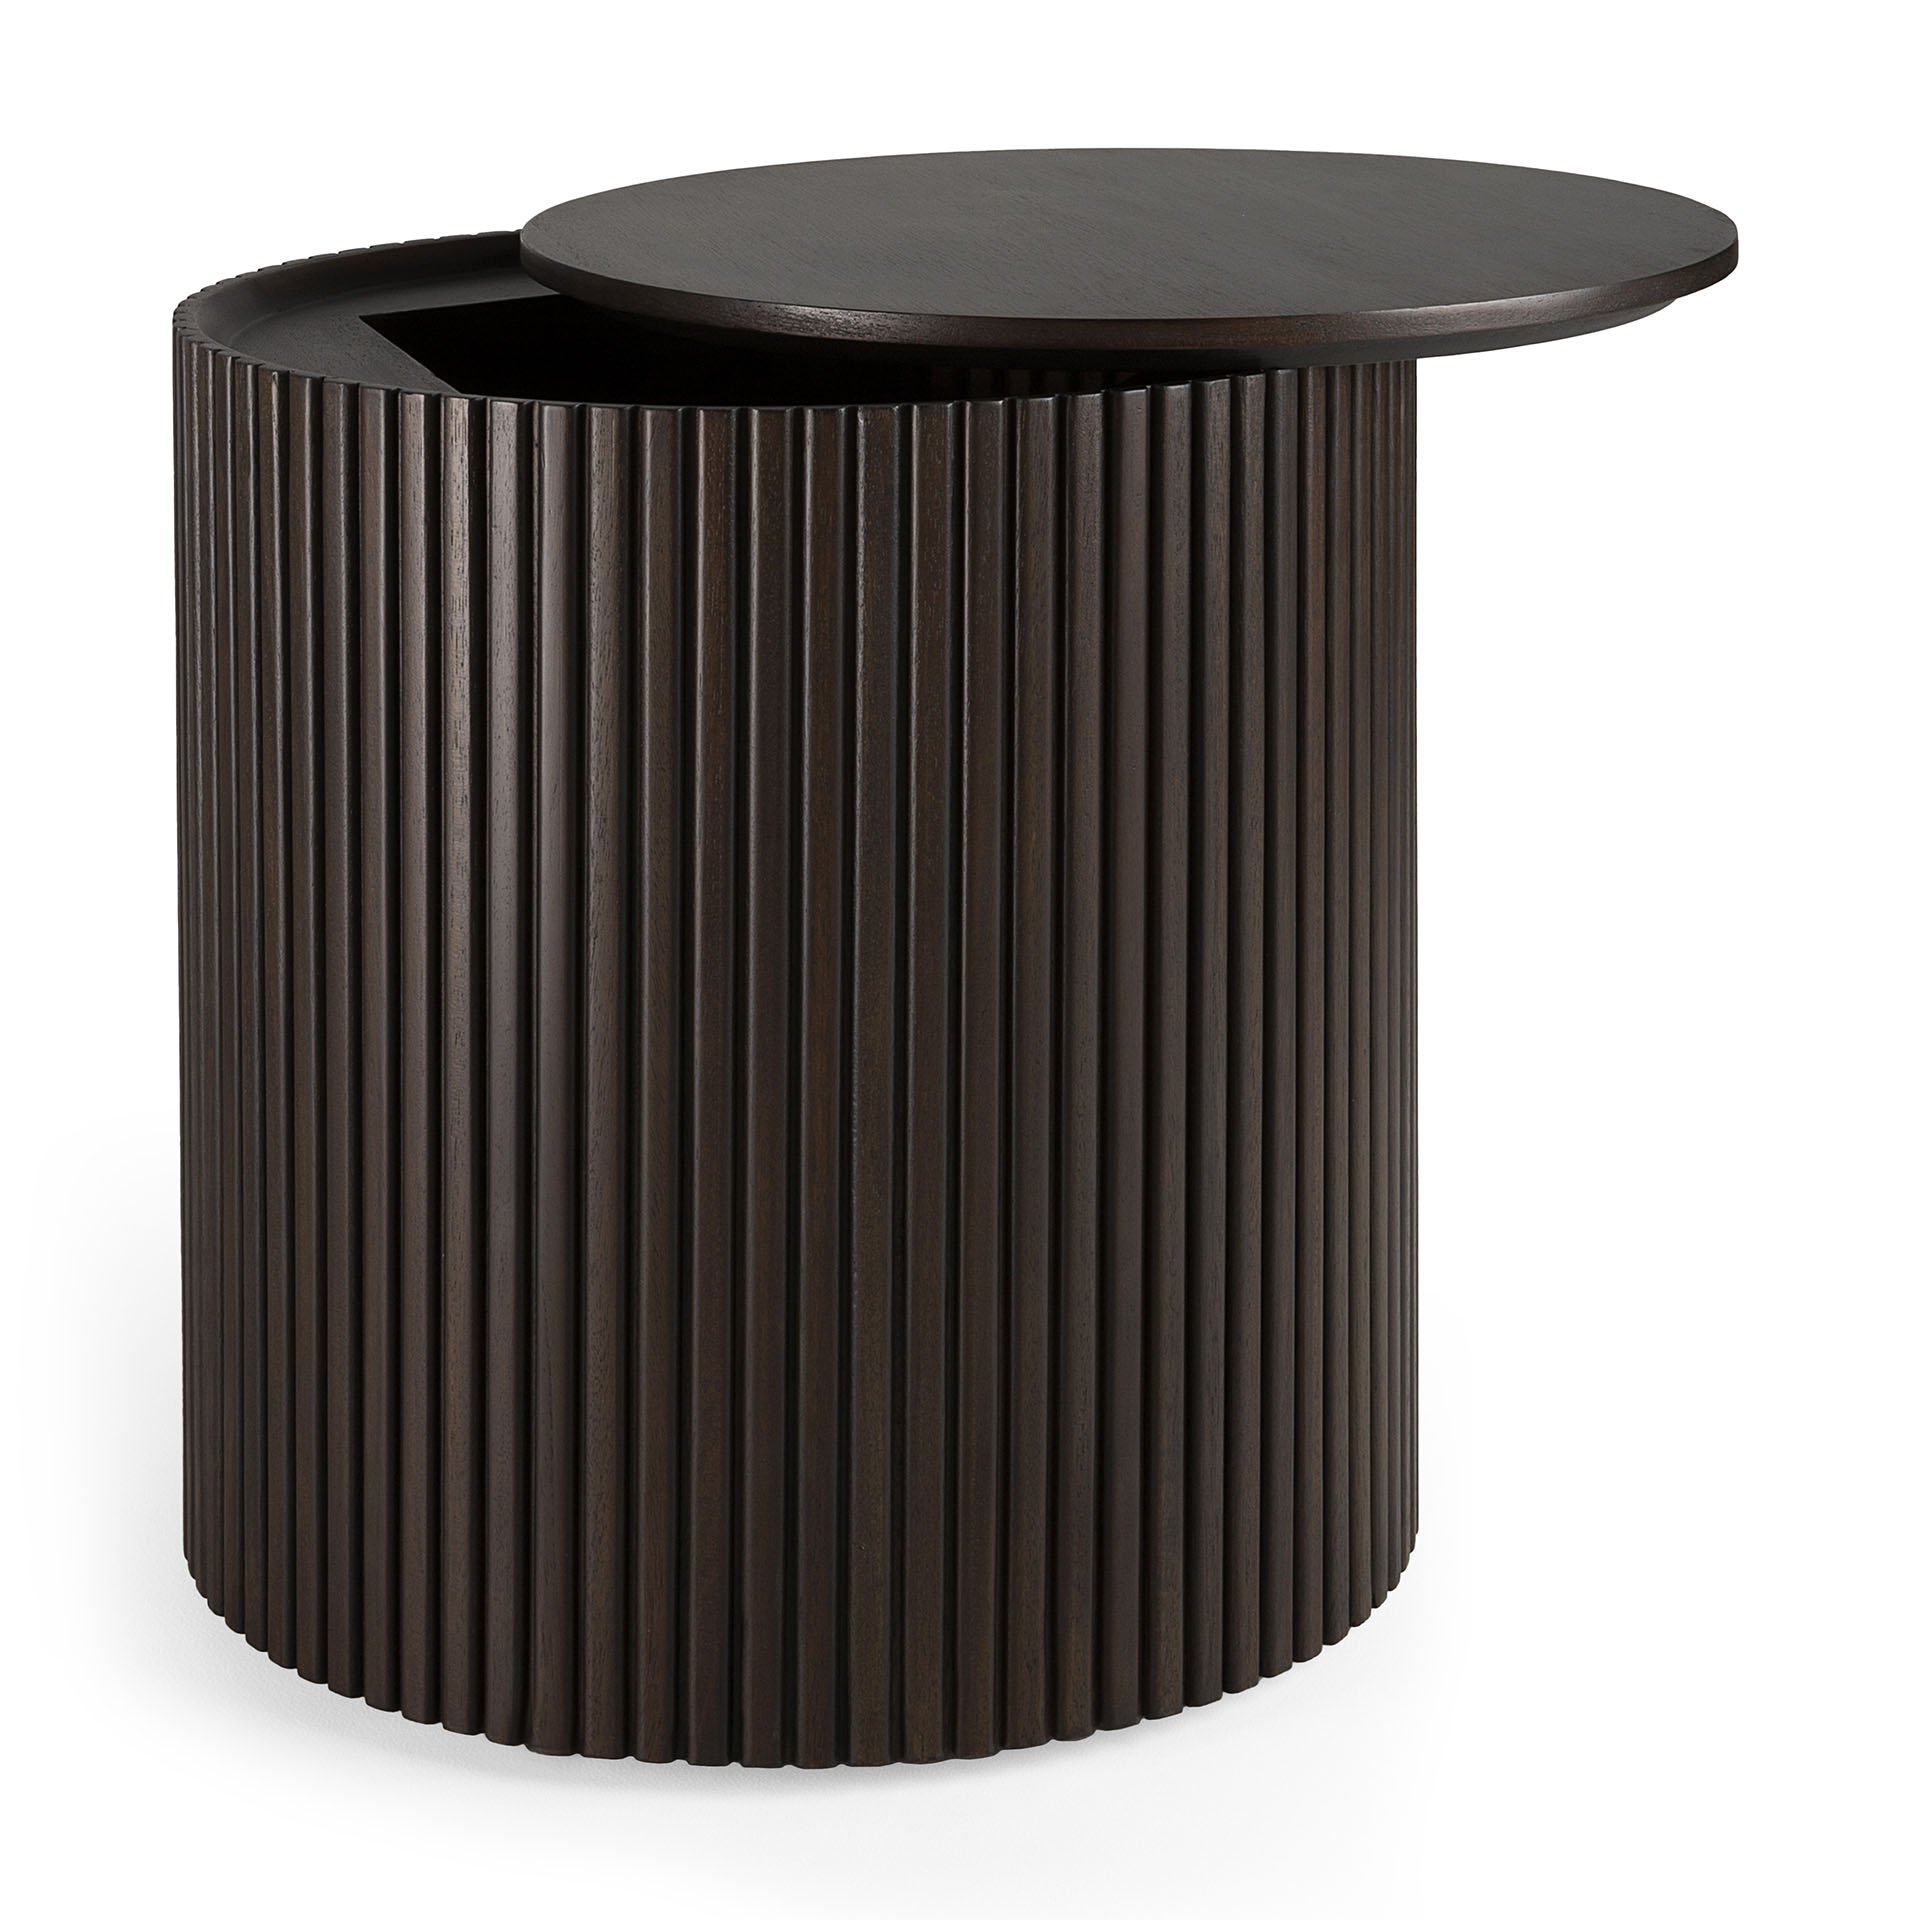 35003_Mahogany_Roller_Max_round_side_table_dark_brown_side_cut_WEB